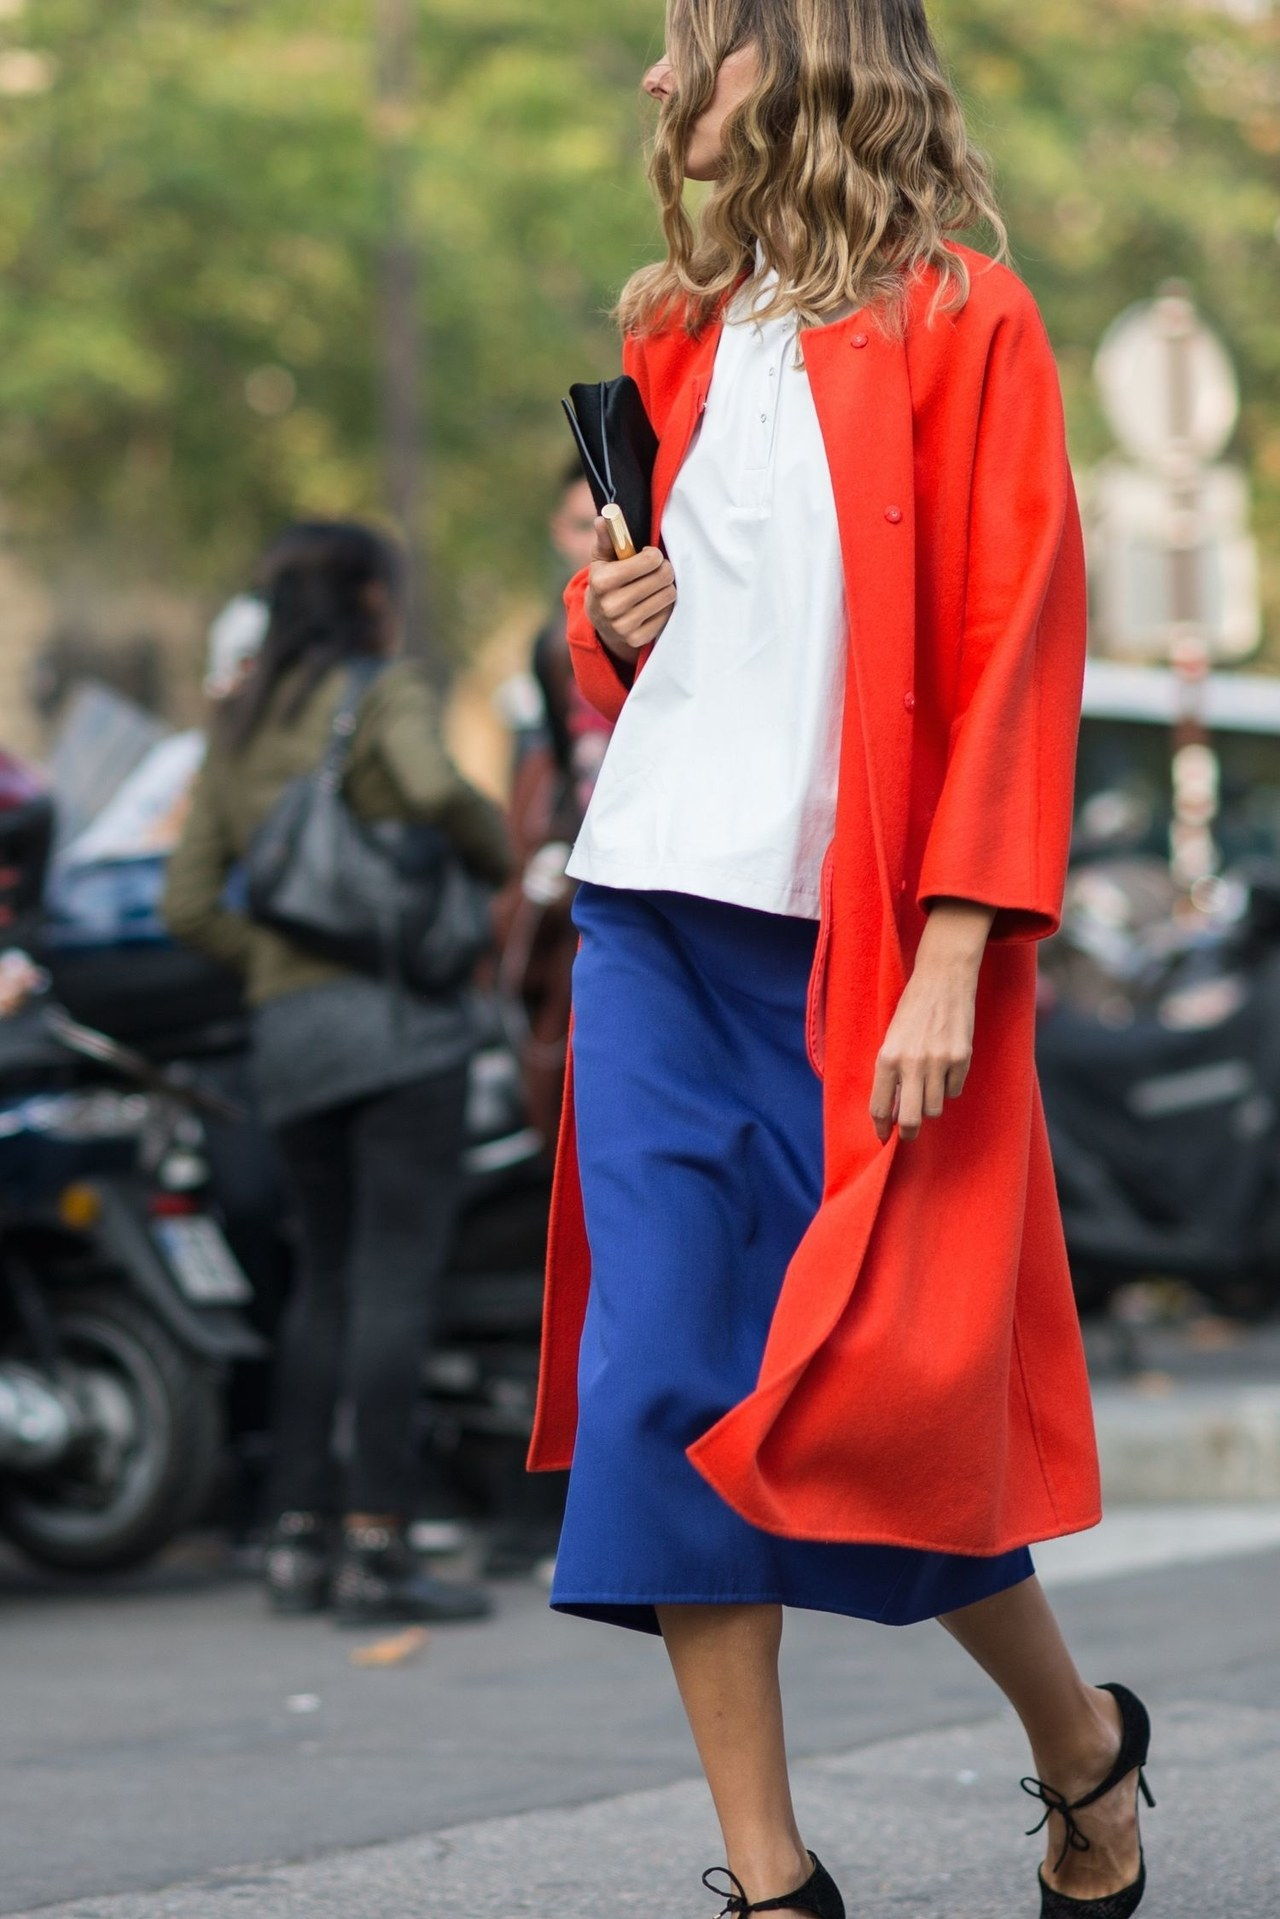 zima red outfit ideas melodie jeng blue coat